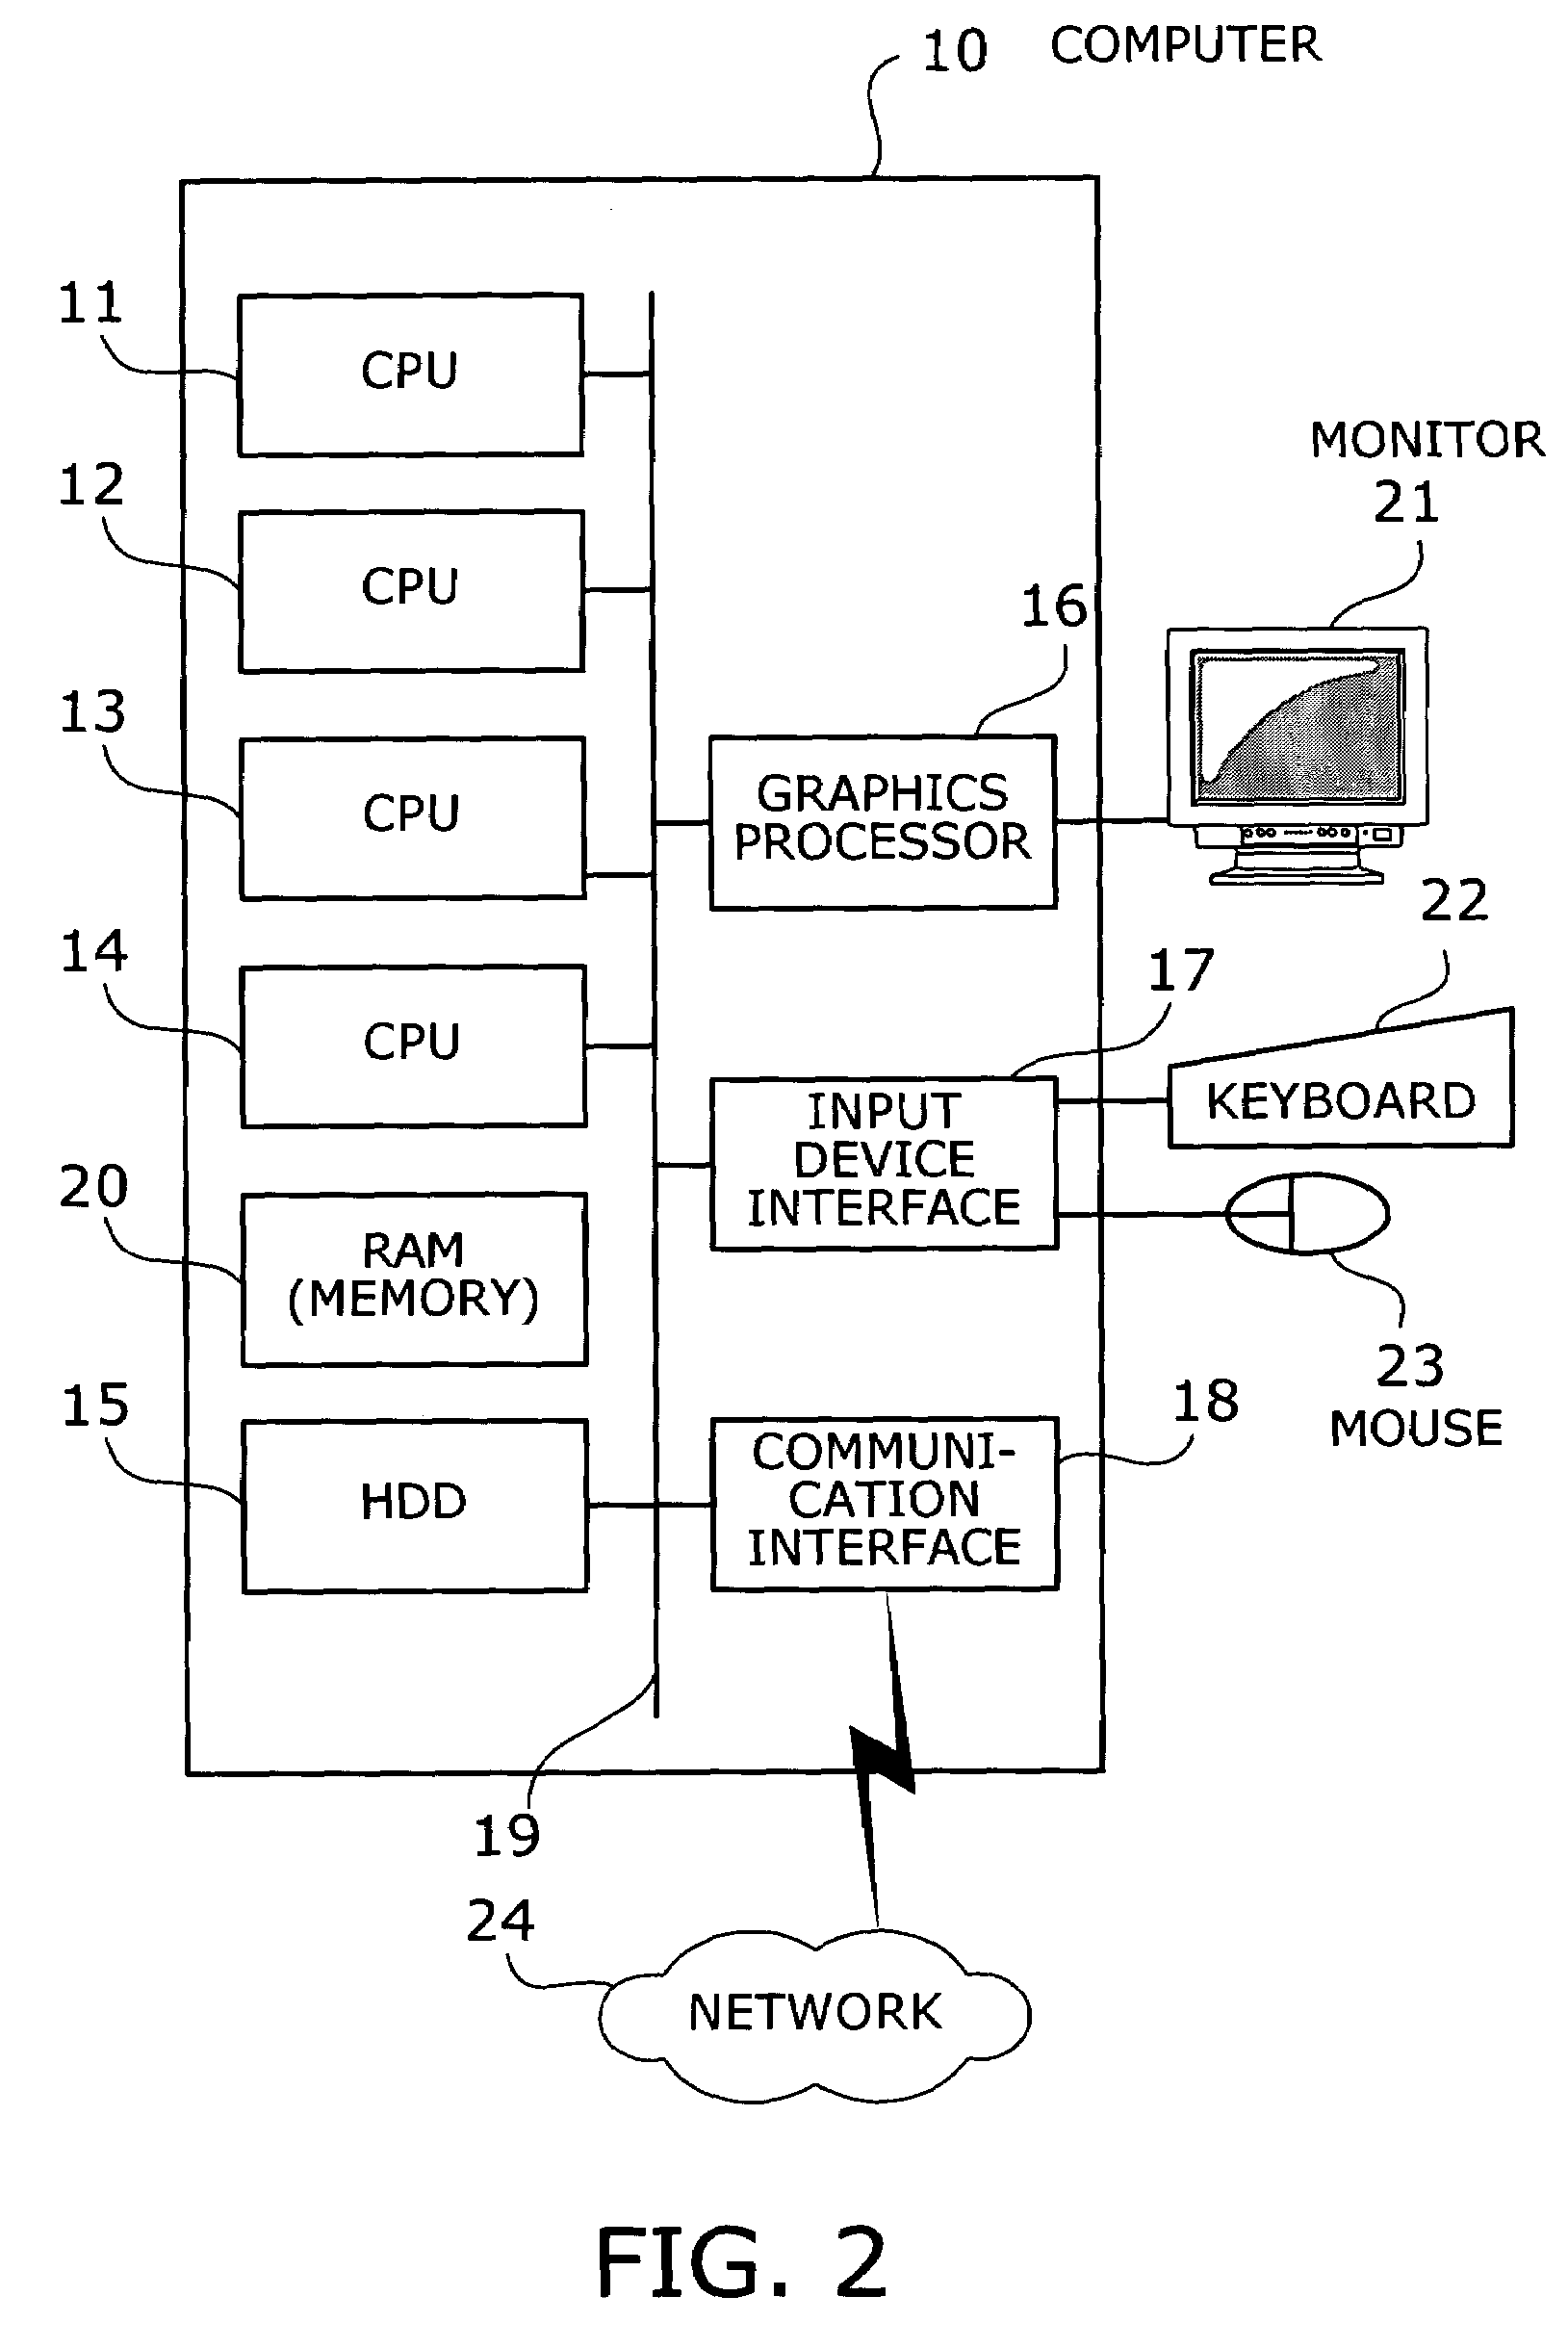 Parallel process execution method and multiprocessor computer